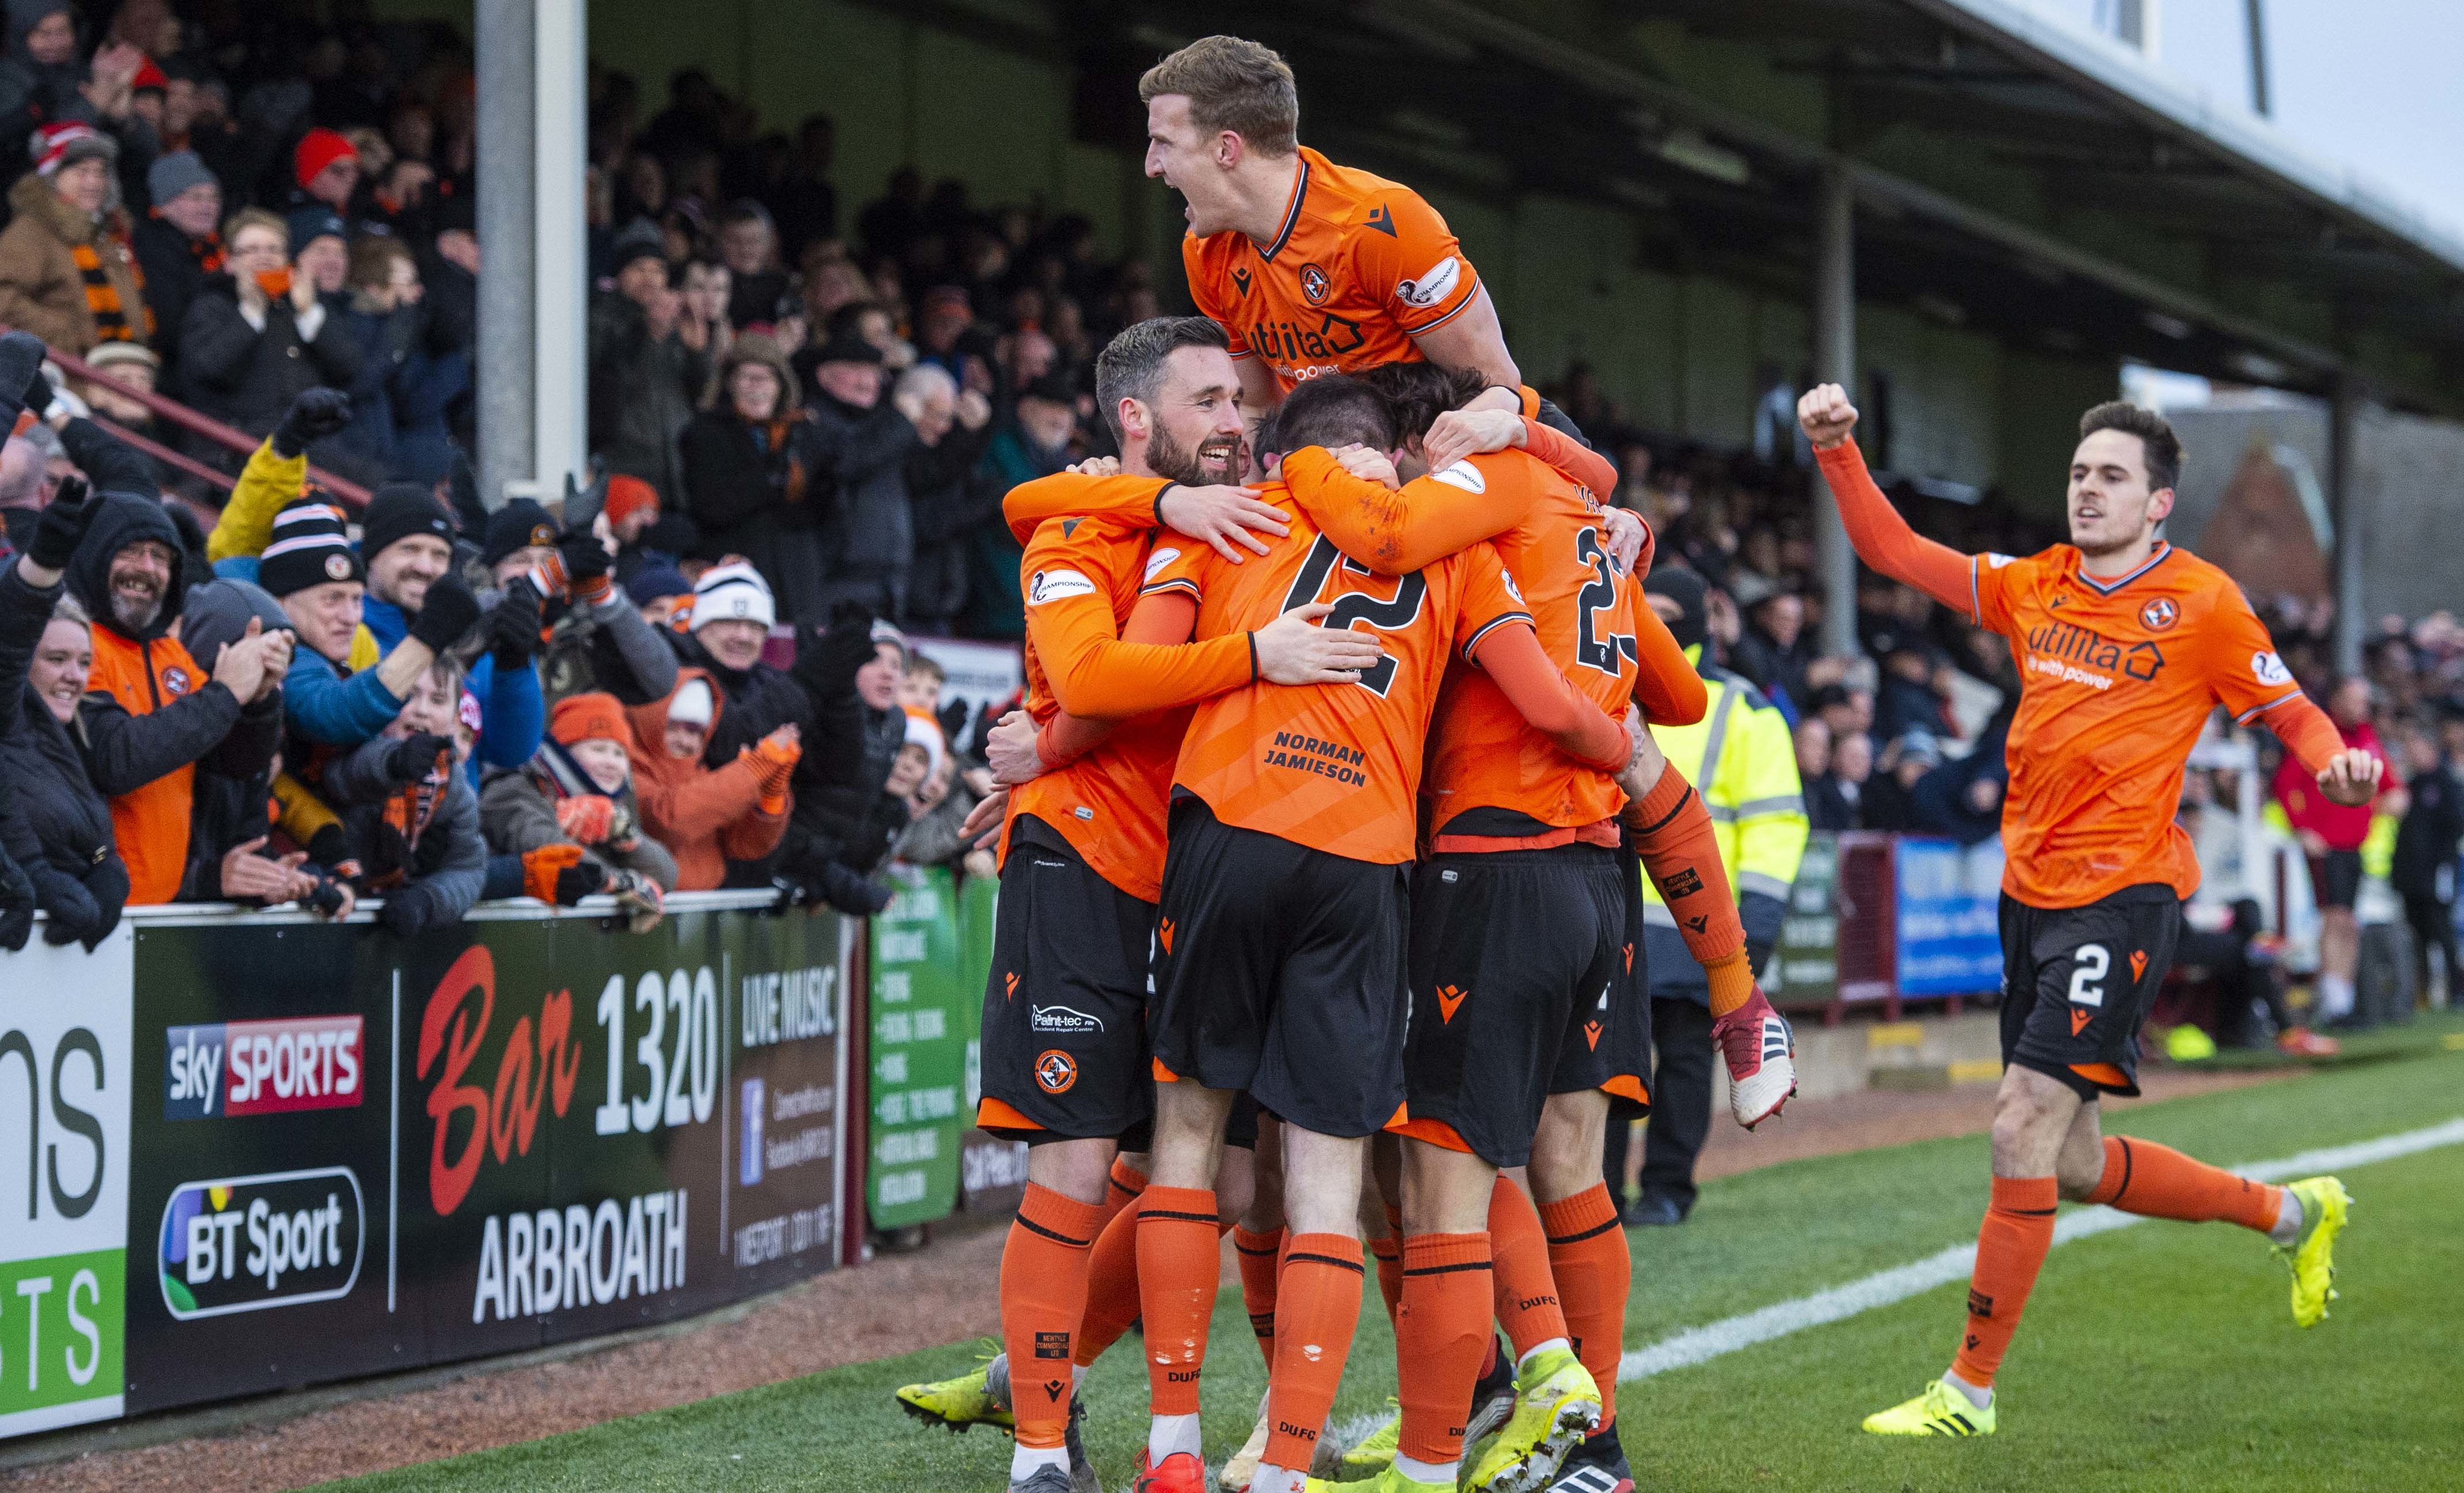 United number 12 Sam Stanton is mobbed after opening the scoring.